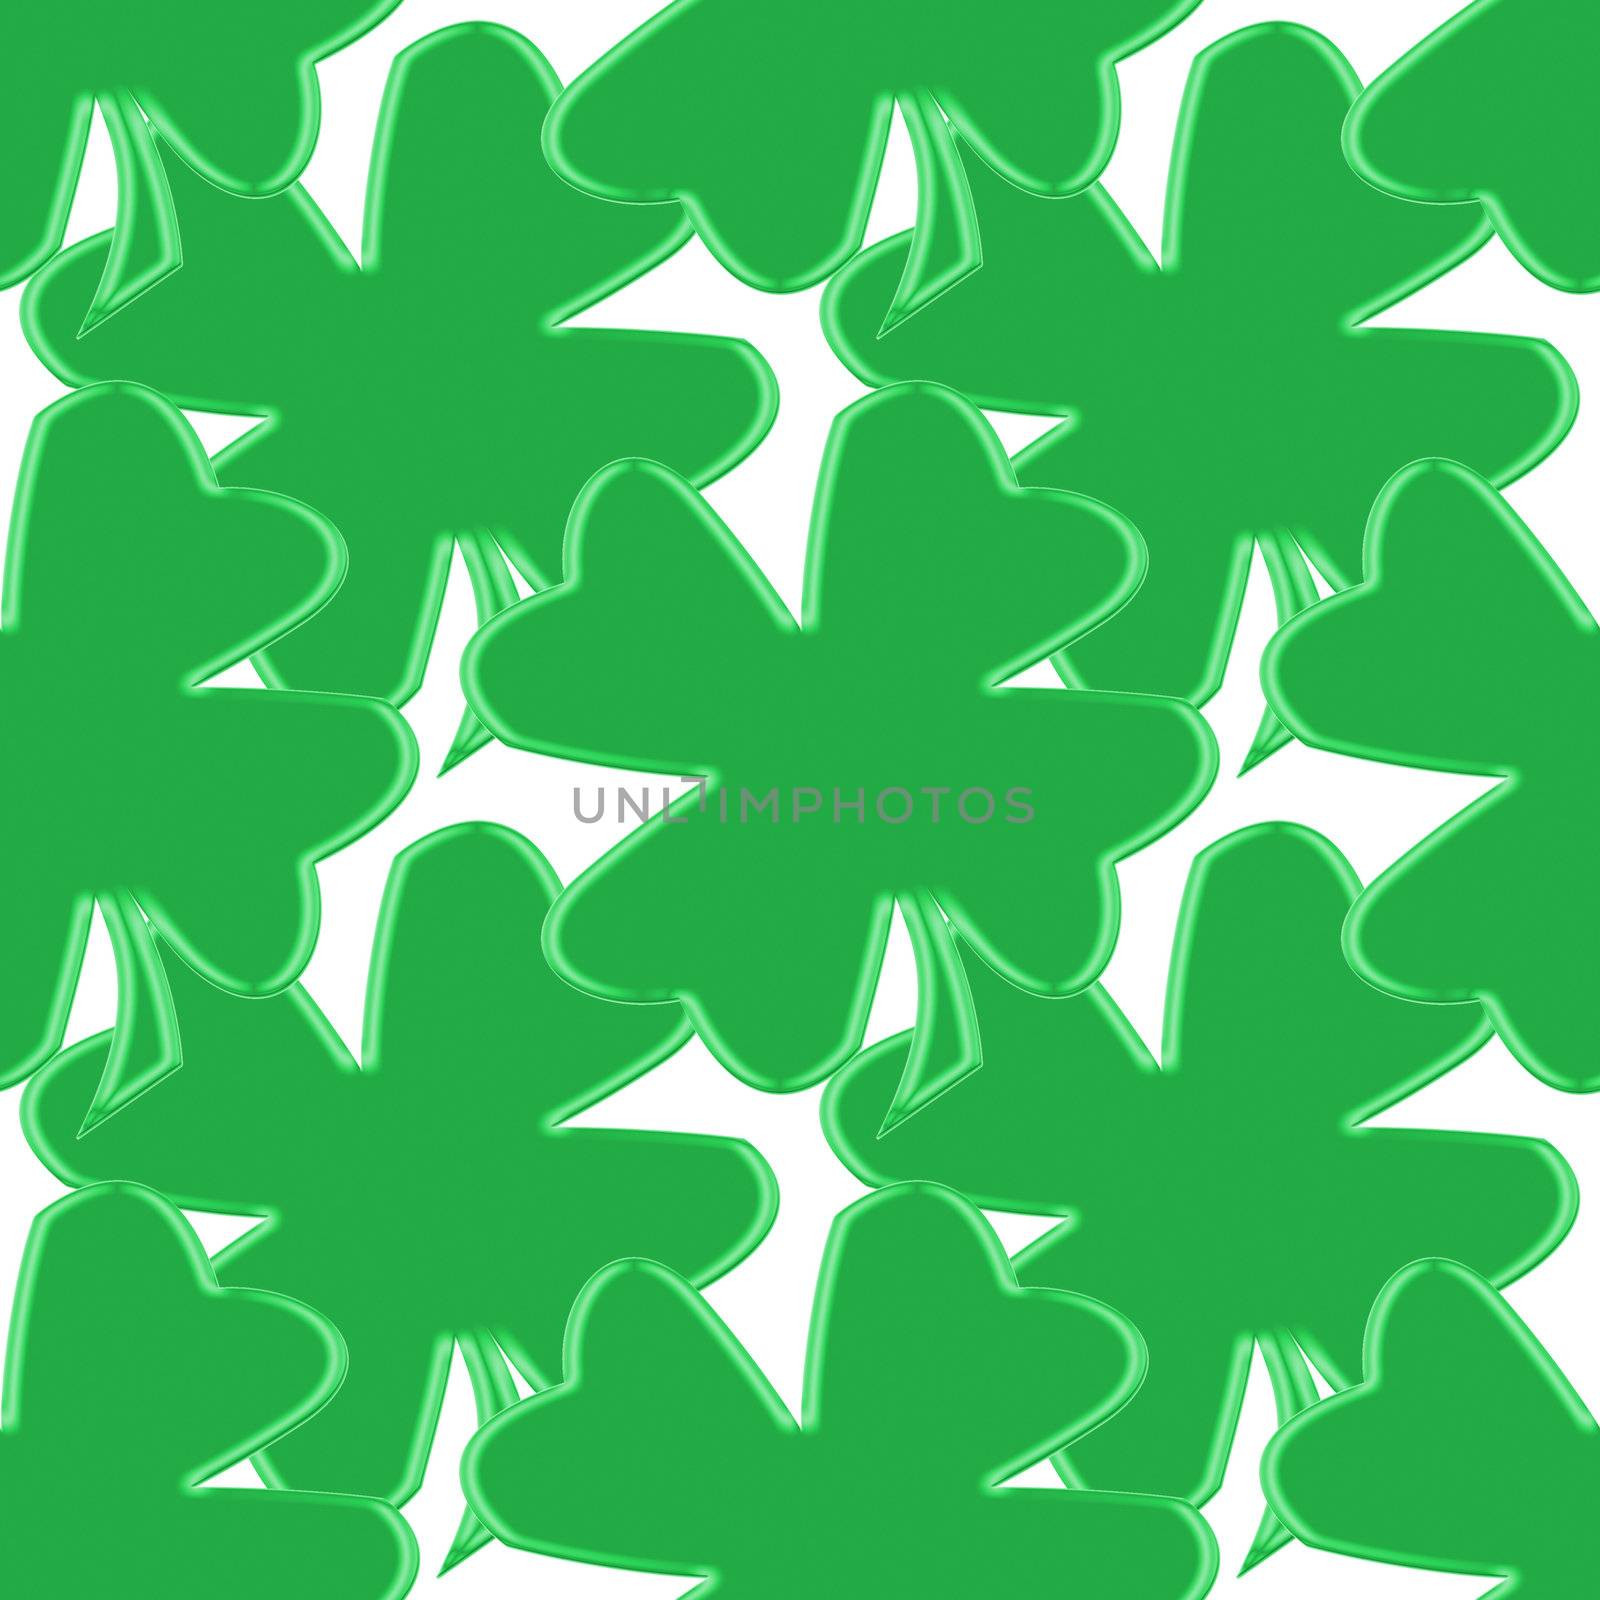 seamless tillable background with clover leaves for St. Patricks day isolated over white